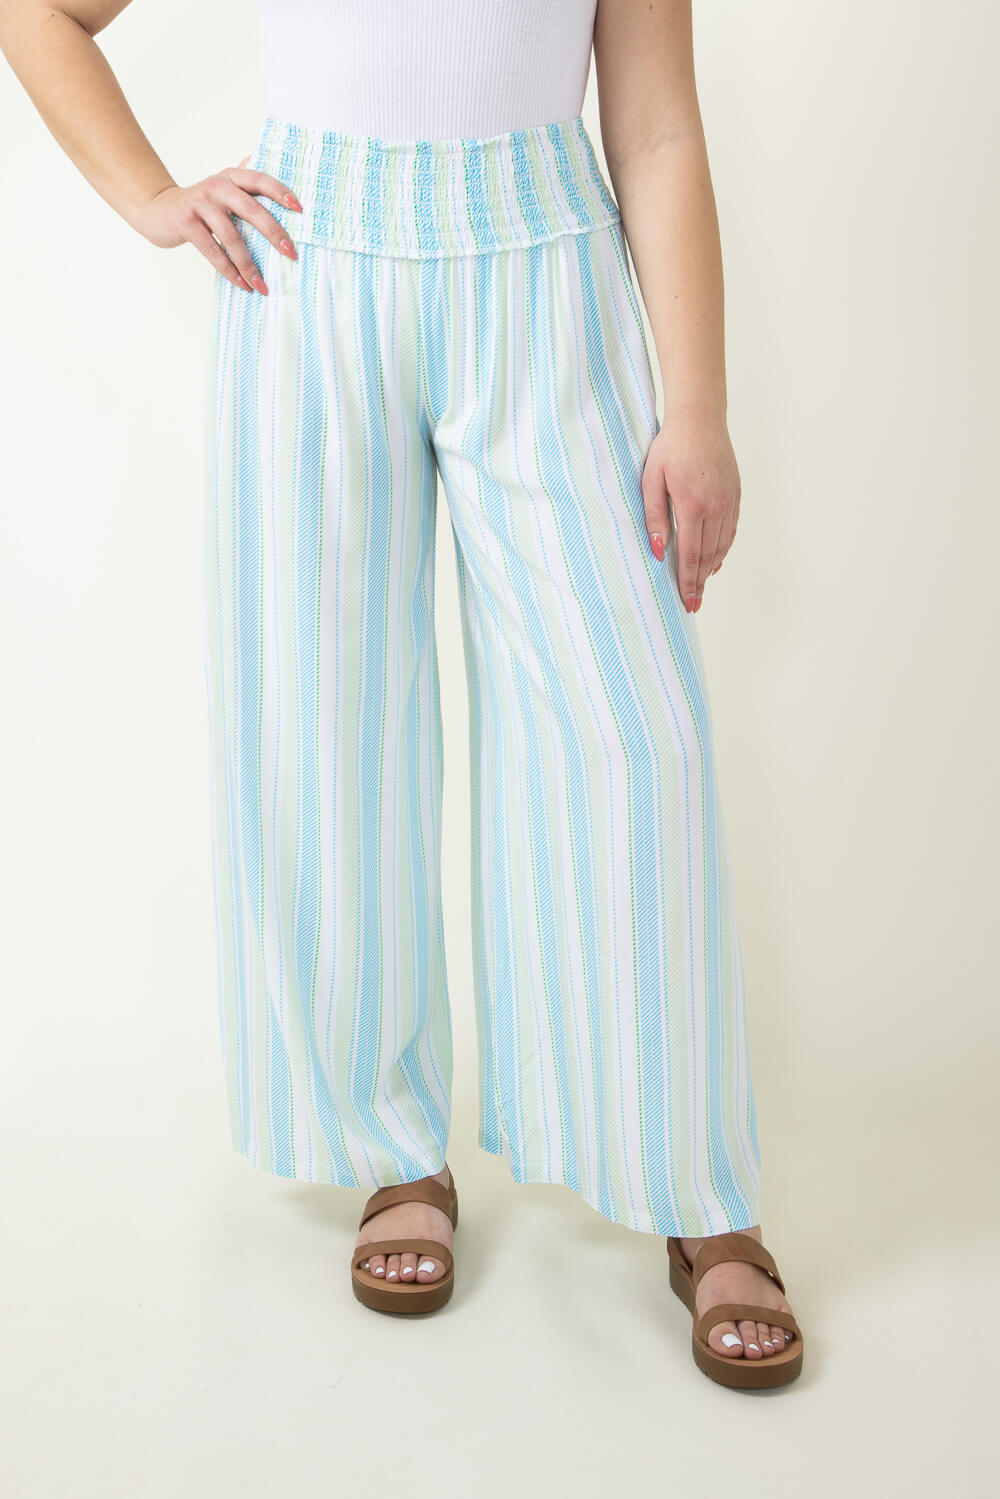 Simply Southern Palazzo Stripe Pants for Women in Blue/Green